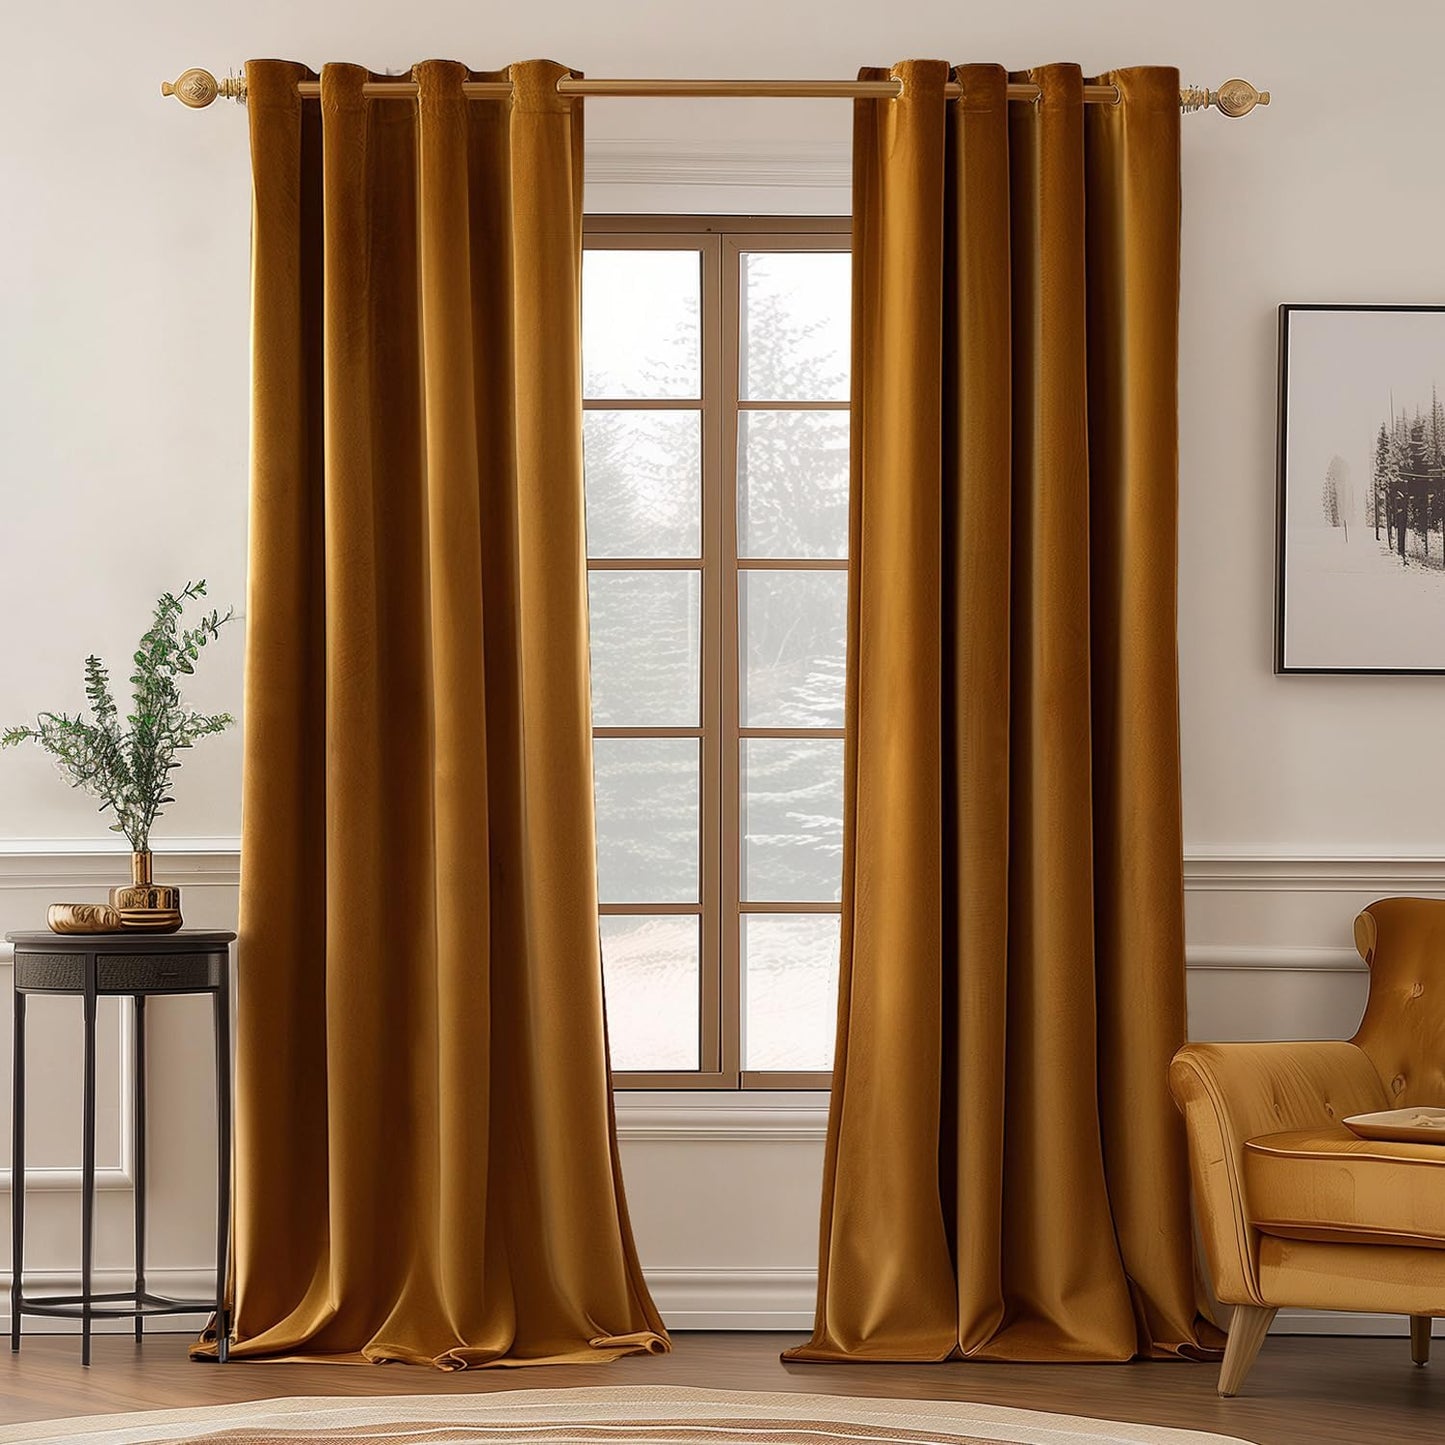 MIULEE Velvet Curtains Olive Green Elegant Grommet Curtains Thermal Insulated Soundproof Room Darkening Curtains/Drapes for Classical Living Room Bedroom Decor 52 X 84 Inch Set of 2  MIULEE Golden Brown W52 X L90 